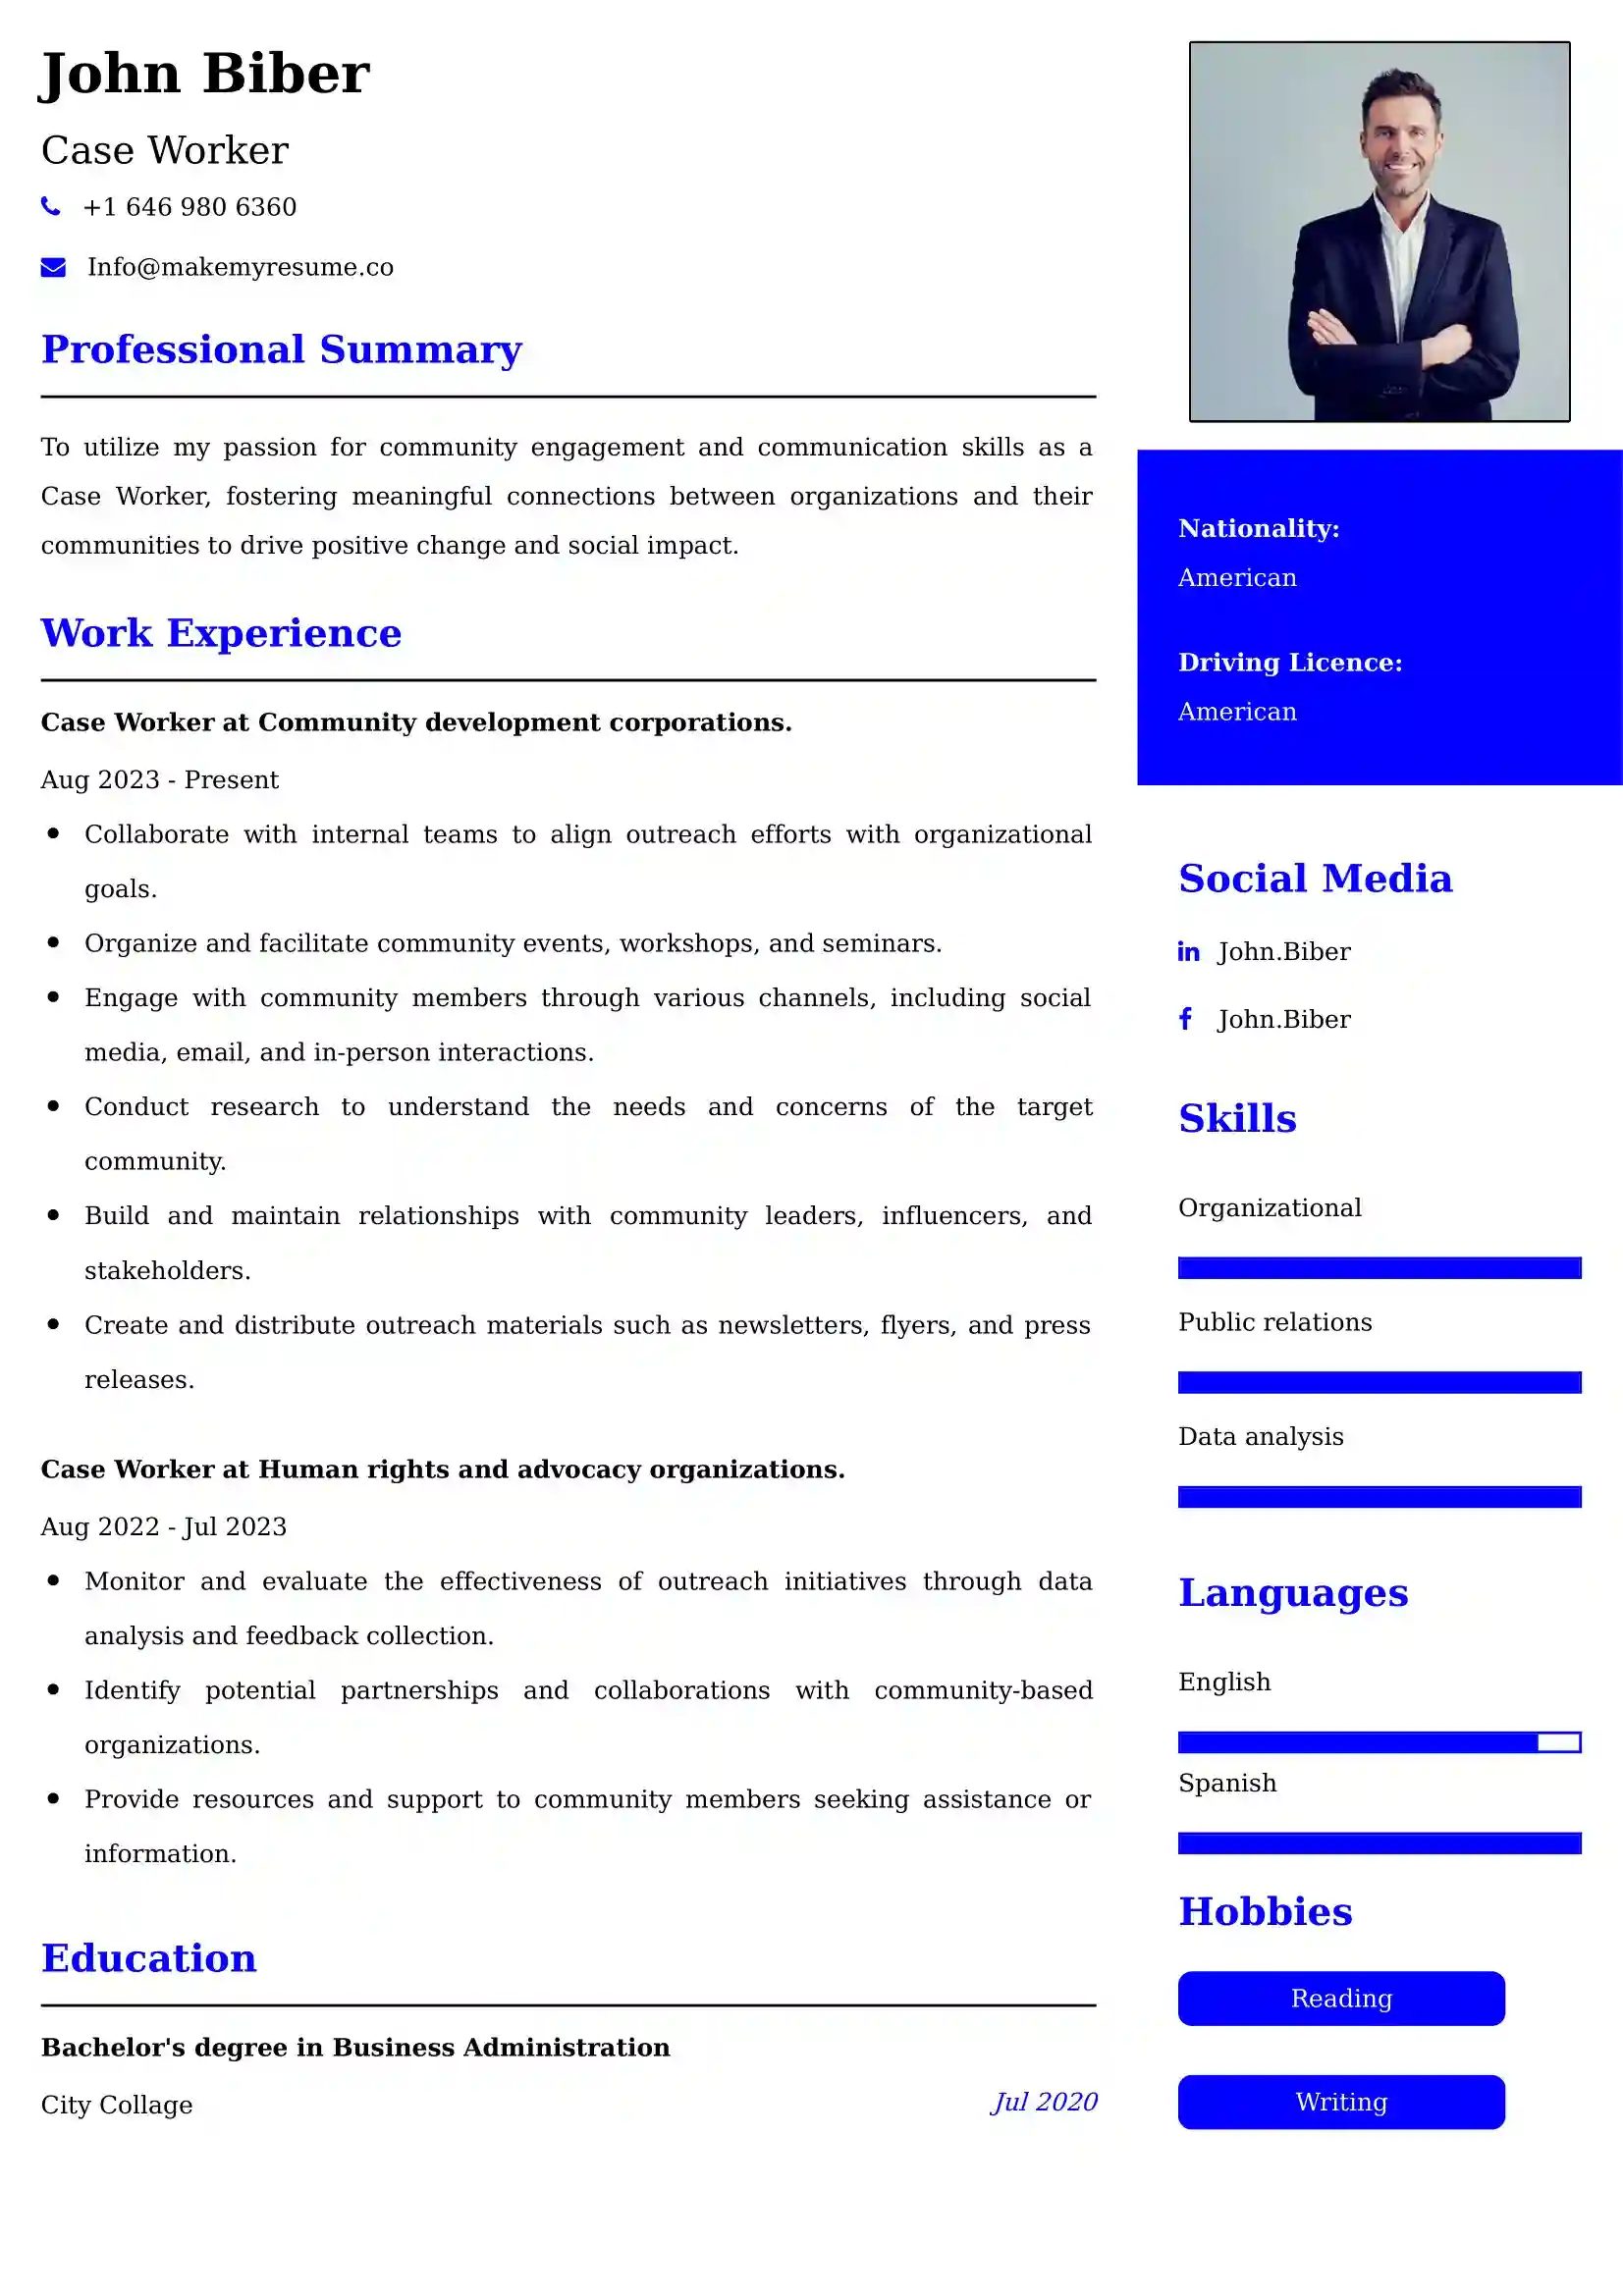 Case Worker Resume Examples - Australian Format and Tips